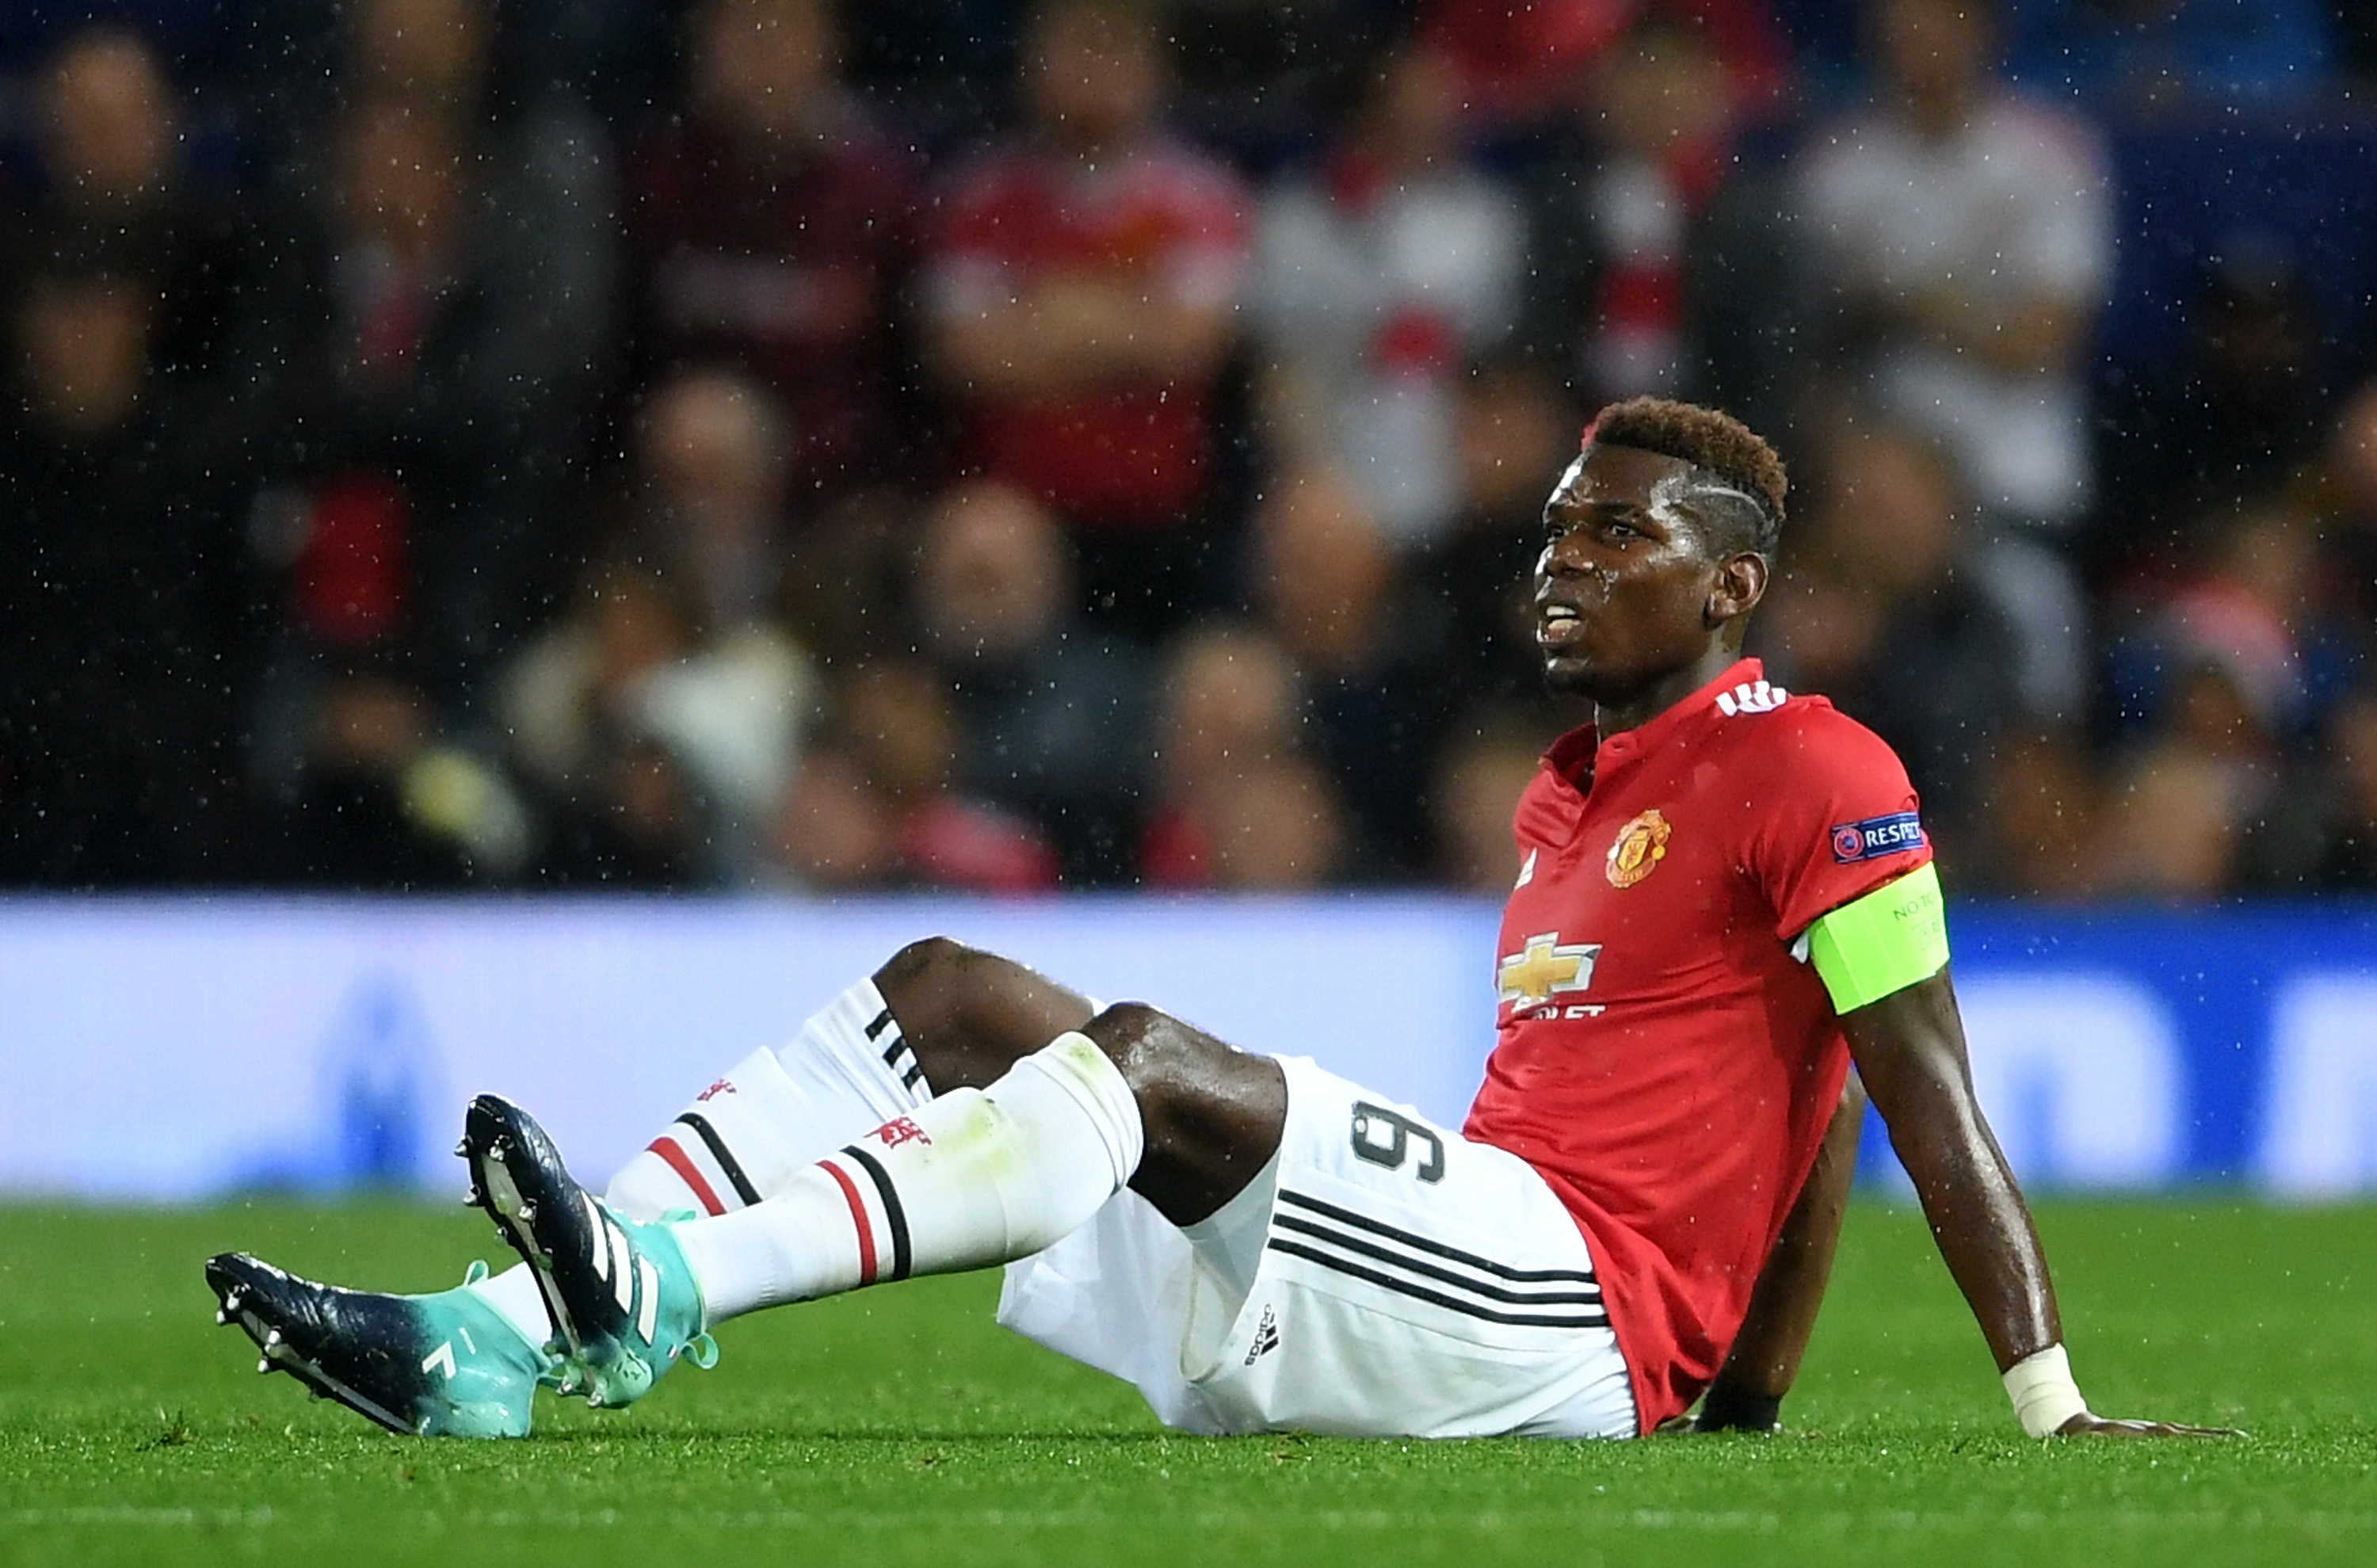 MANCHESTER, ENGLAND - SEPTEMBER 12: Paul Pogba of Manchester United goes down injured during the UEFA Champions League Group A match between Manchester United and FC Basel at Old Trafford on September 12, 2017 in Manchester, United Kingdom.  (Photo by Laurence Griffiths/Getty Images)